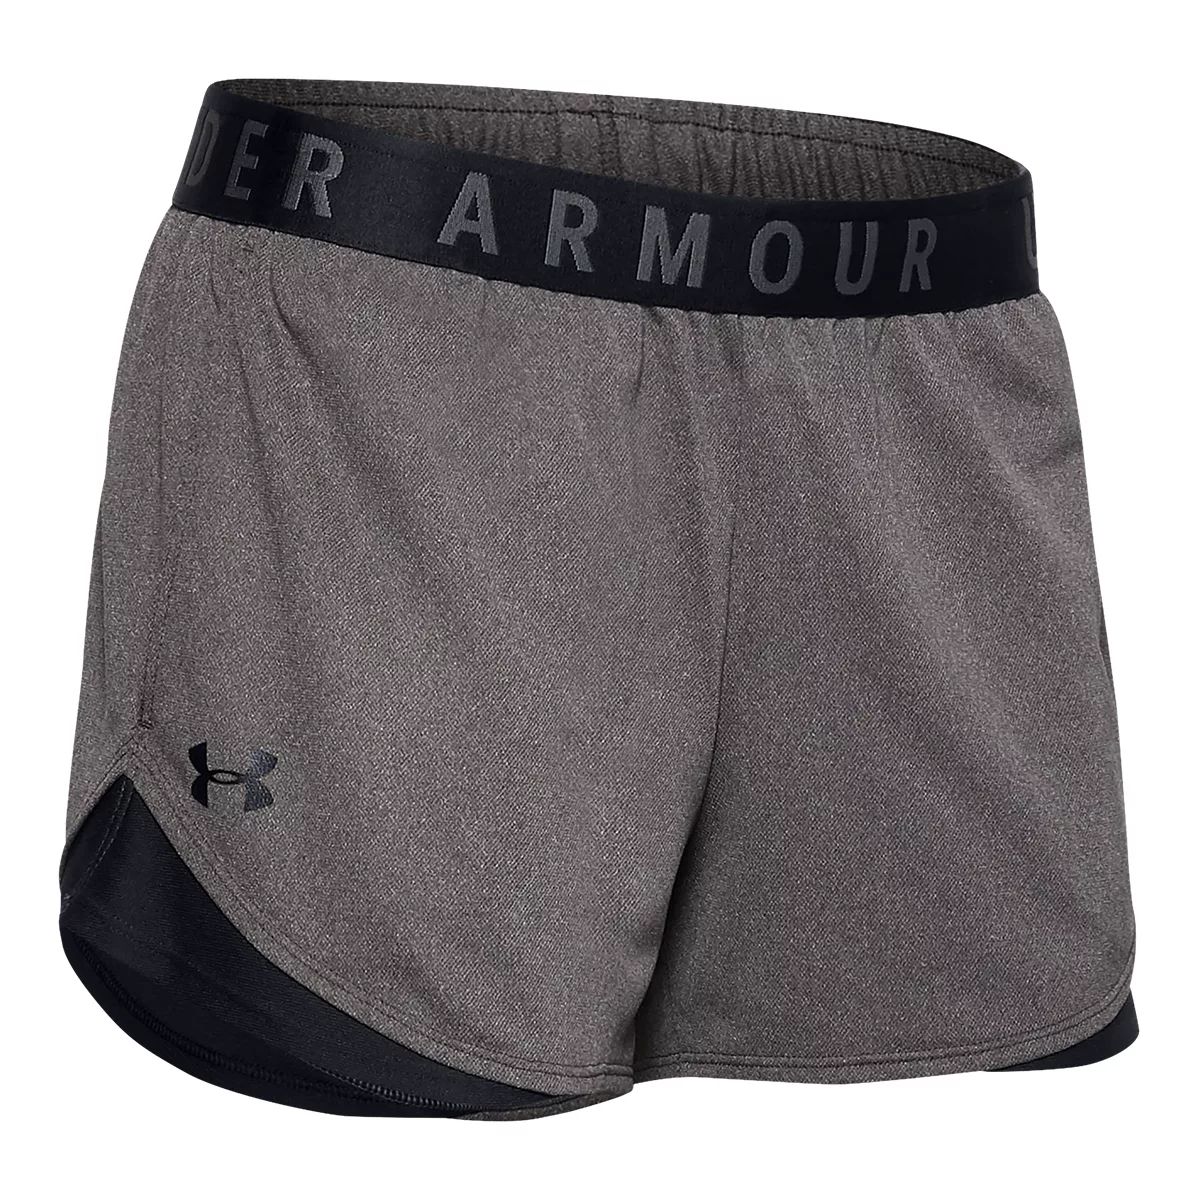 Under Armour Women's Play Up 5 Inch Shorts